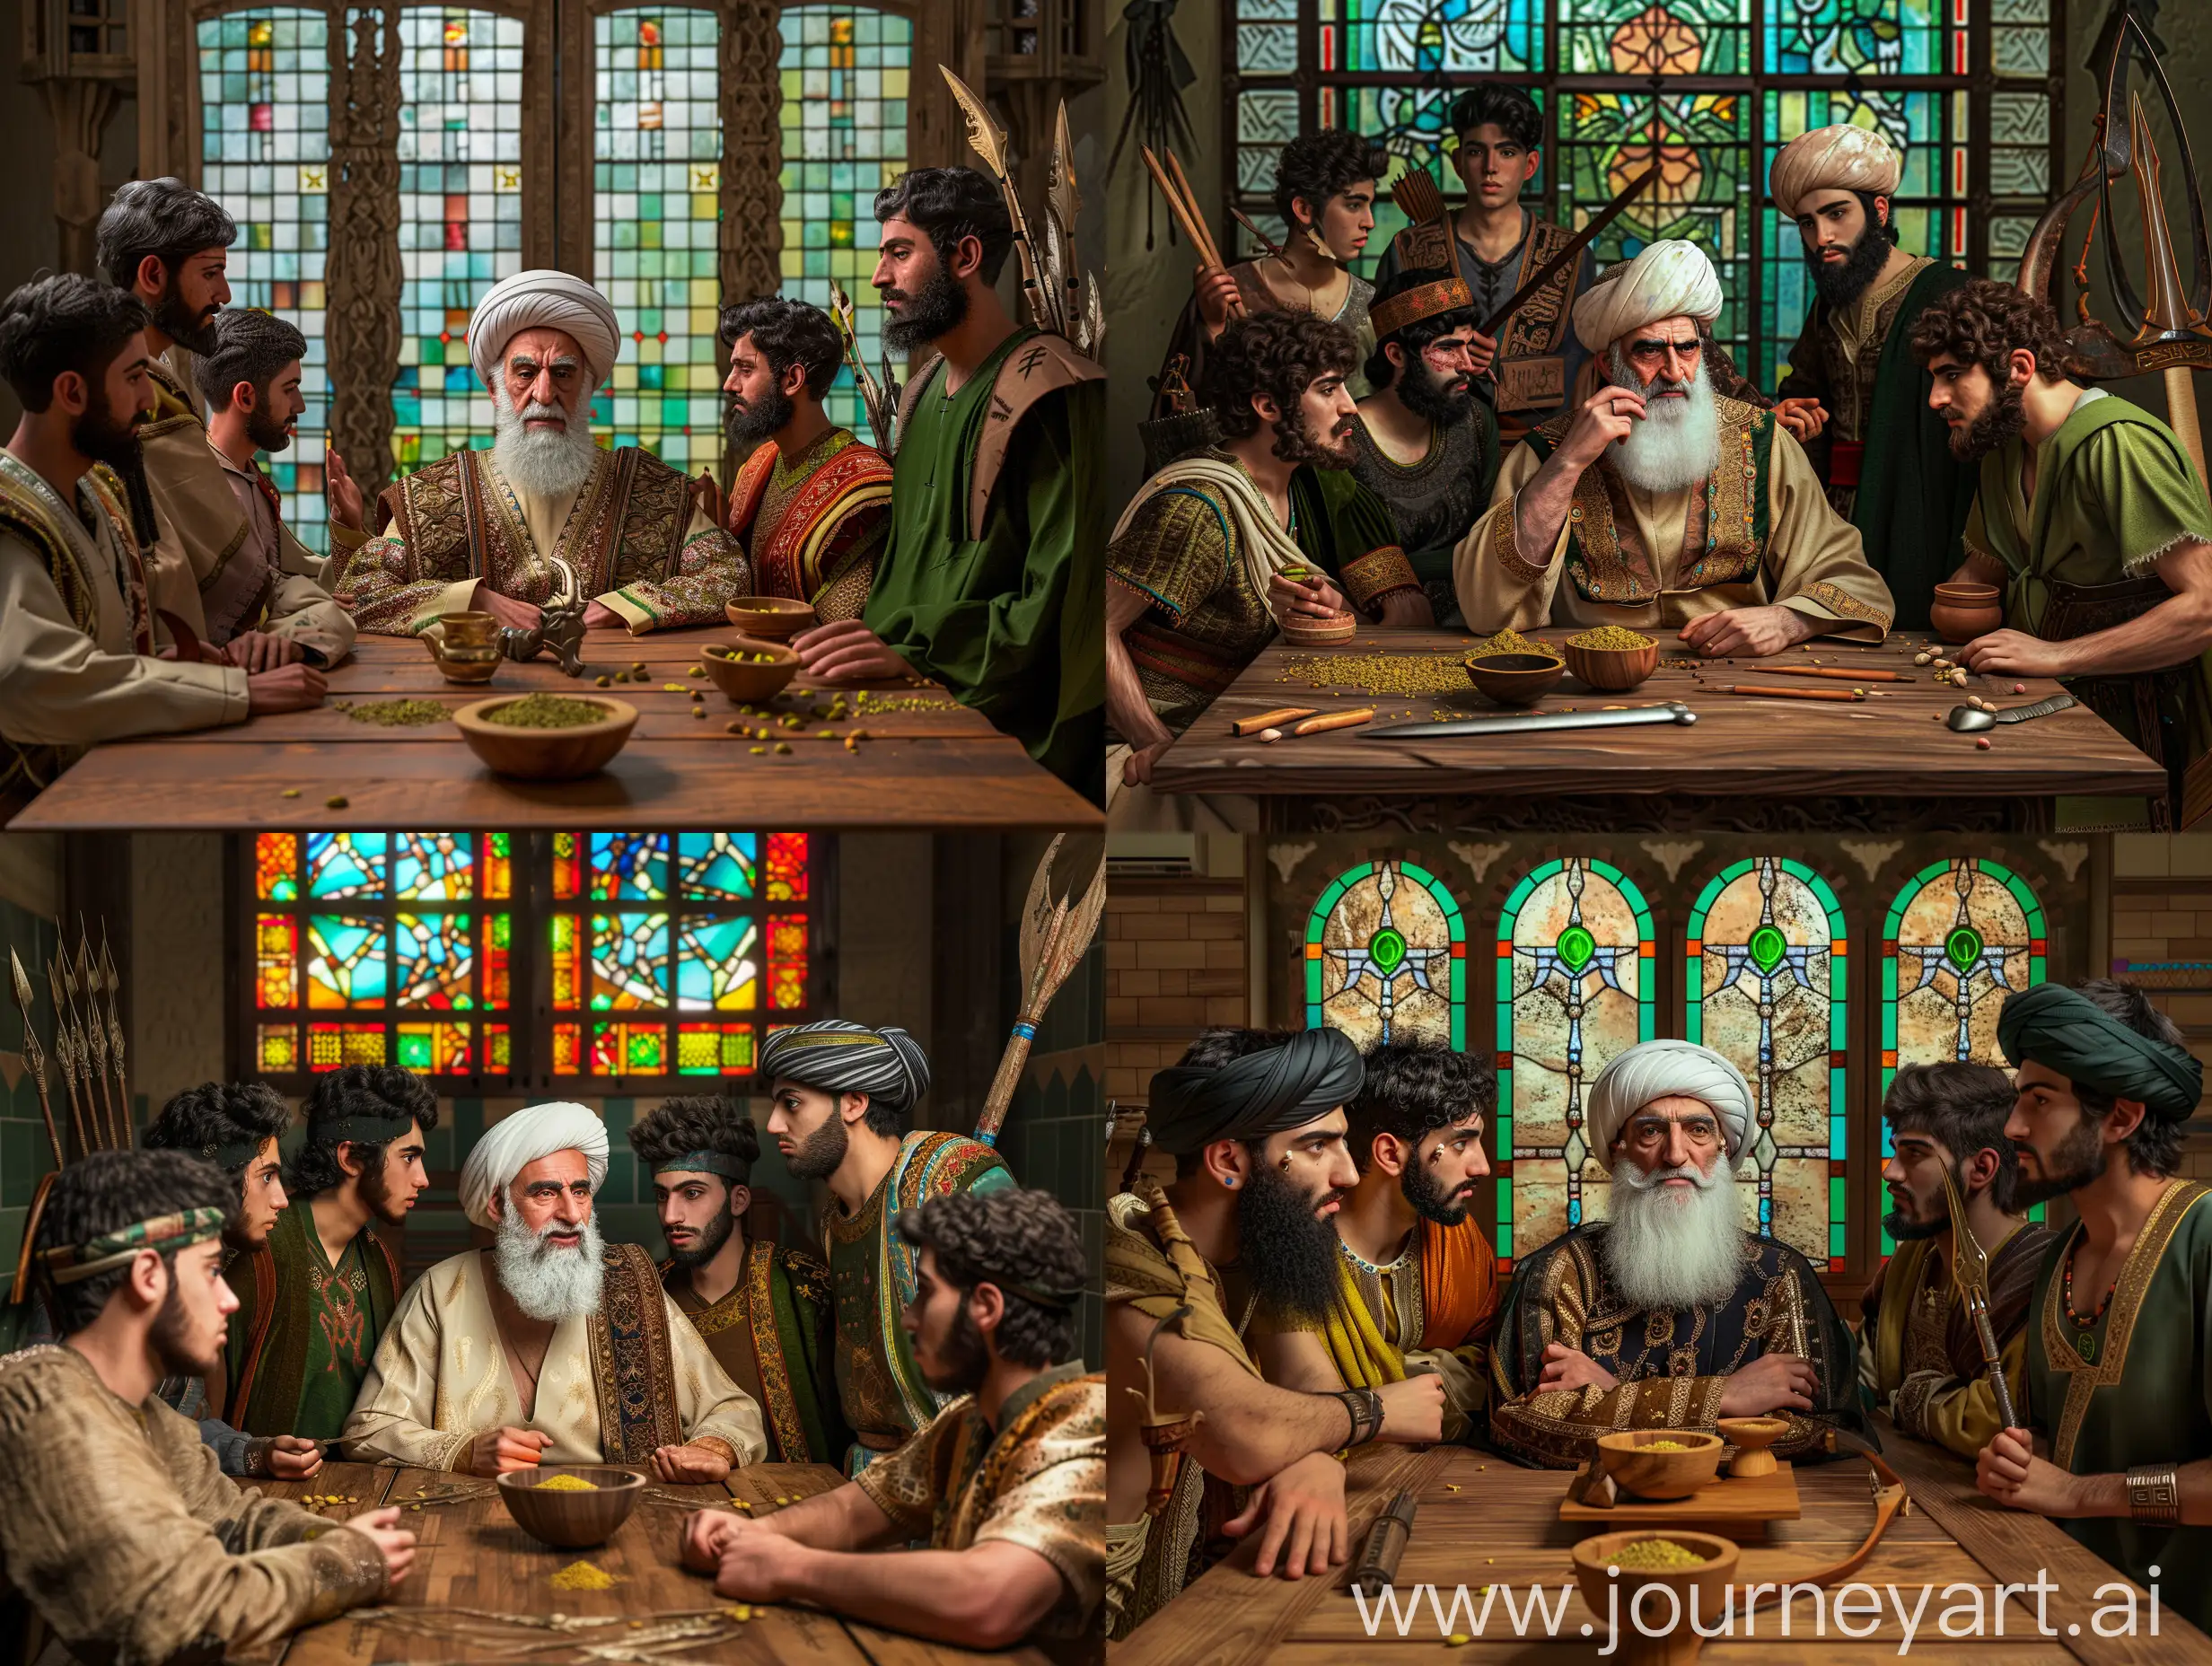 Council-of-Seven-Persian-Warriors-Meeting-with-Elder-Strategist-in-Ancient-Iran